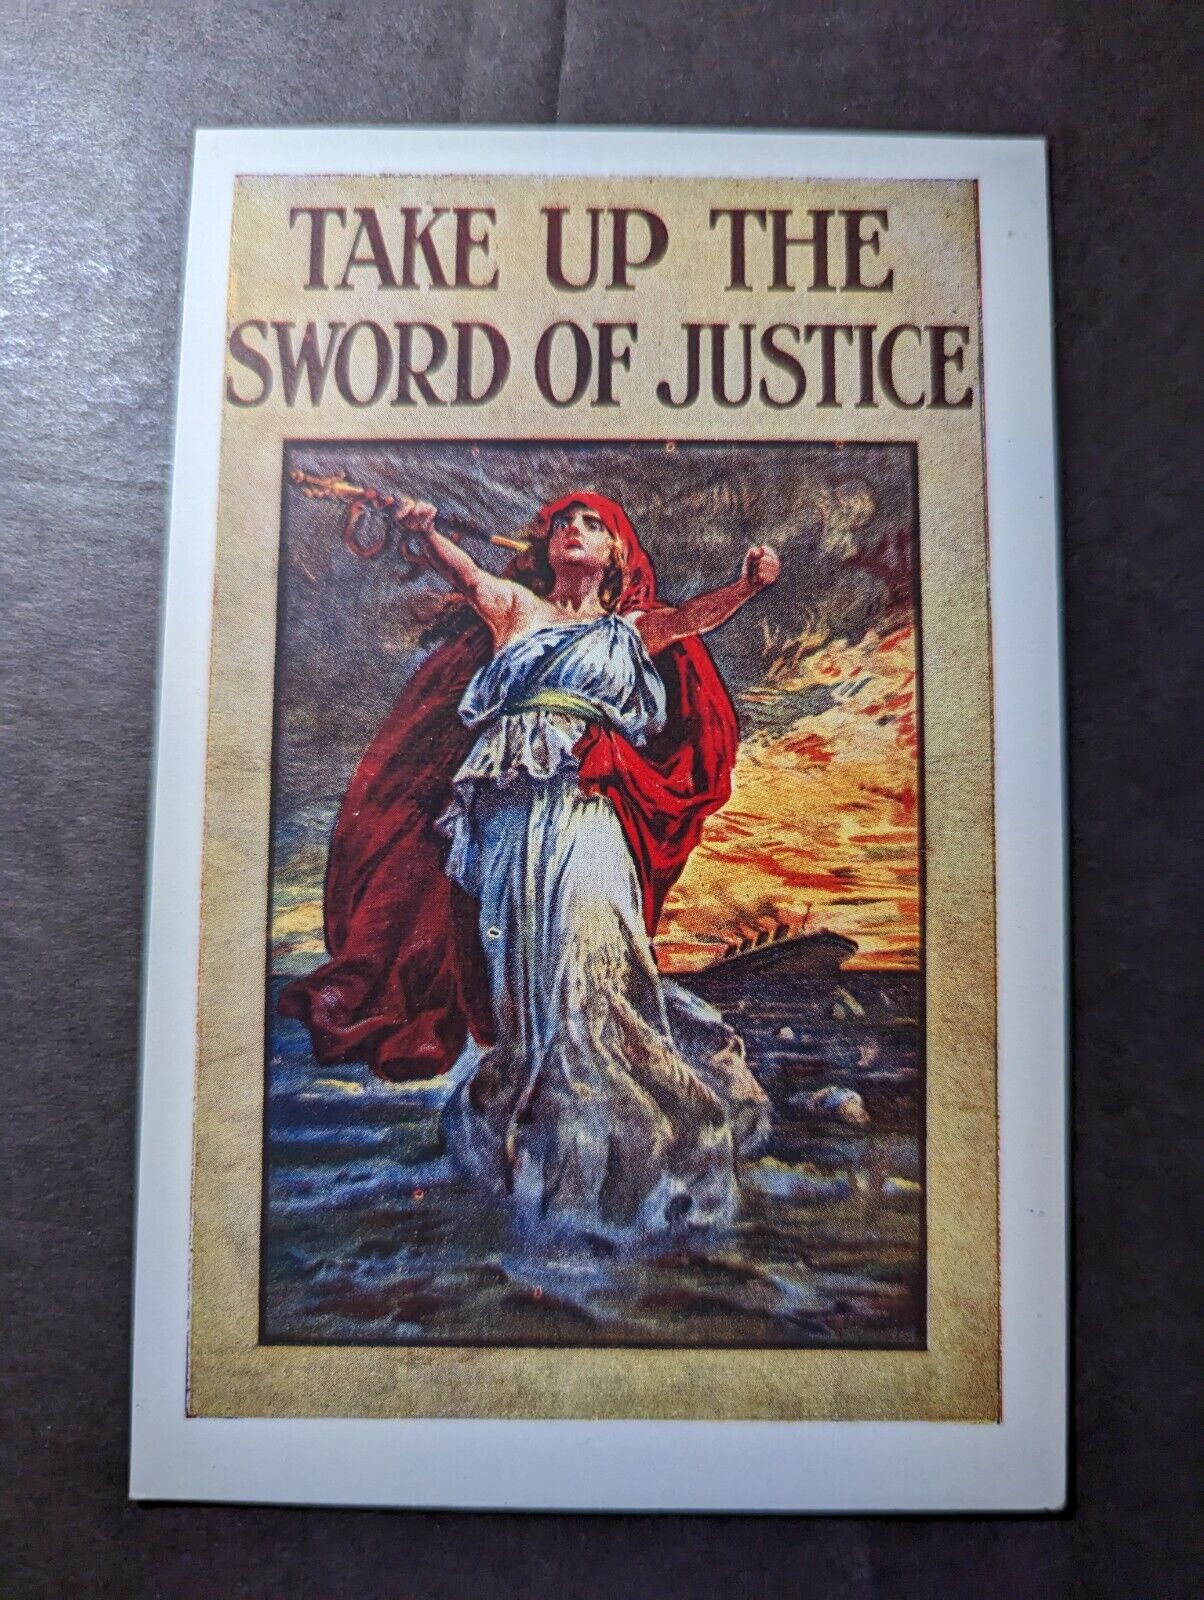 Mint France Recruitment Postcard Take Up The Sword of Justice